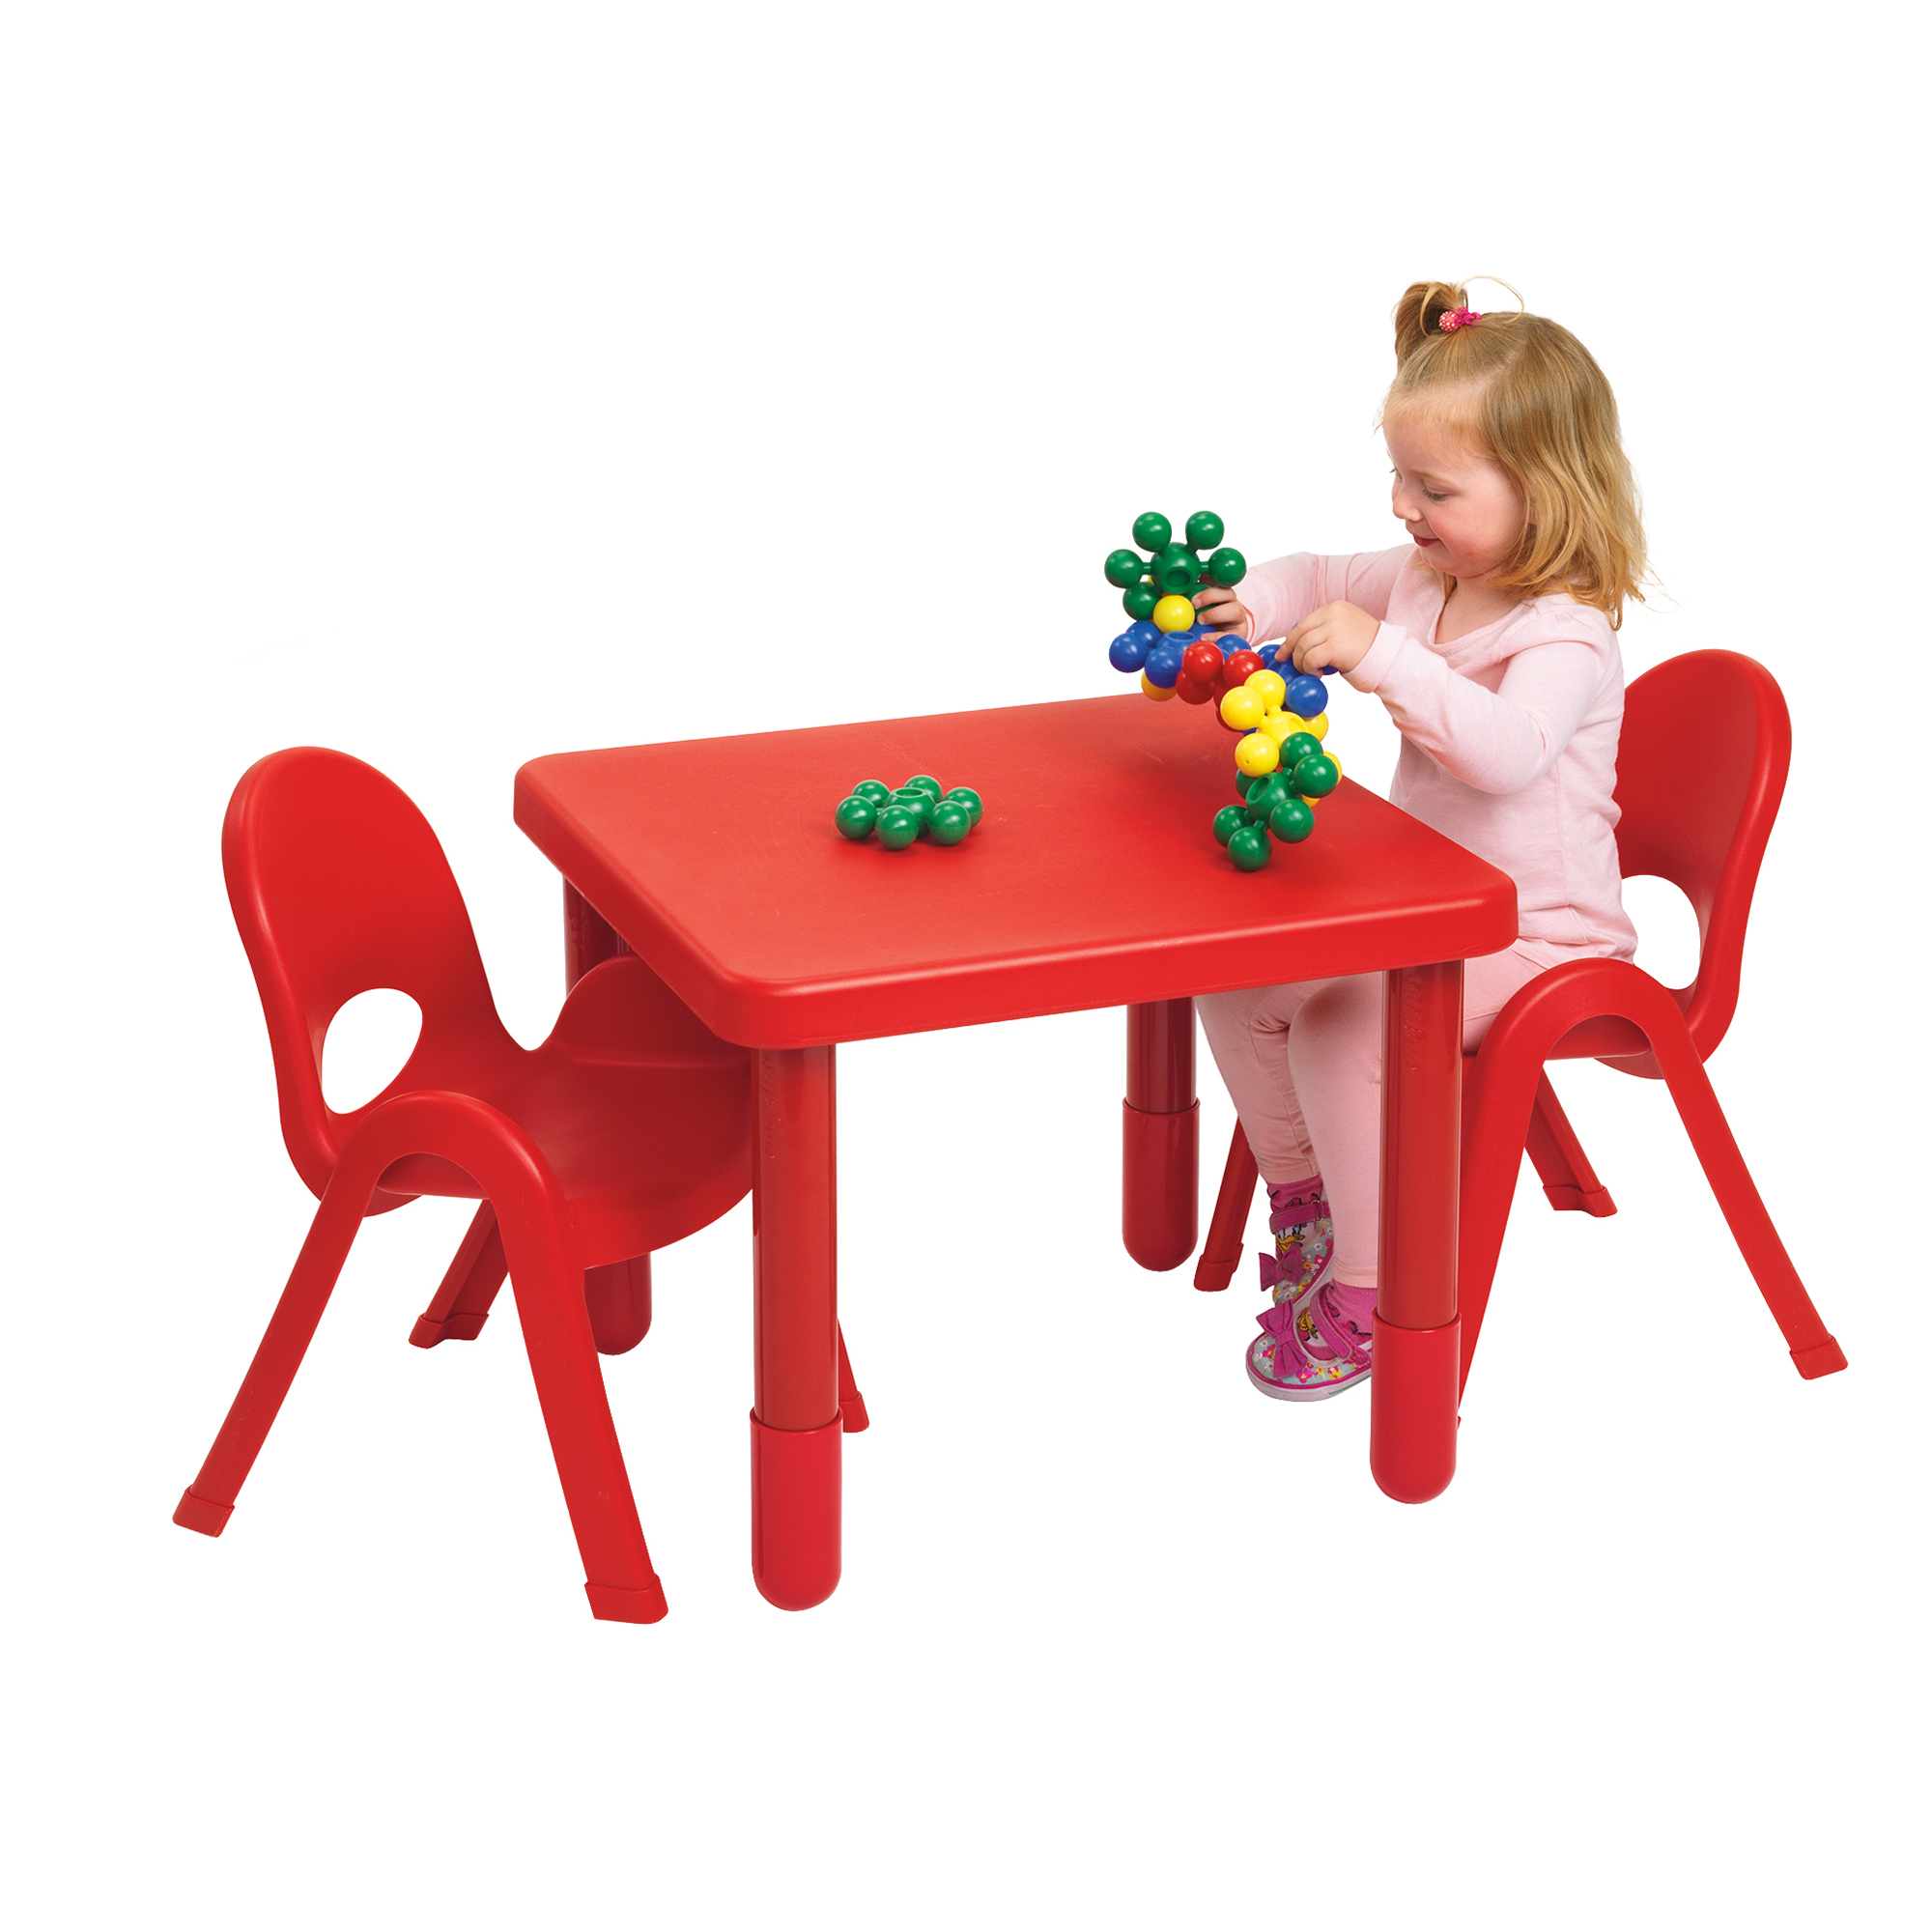 Preschool MyValue™ Set 2 Square - Candy Apple Red